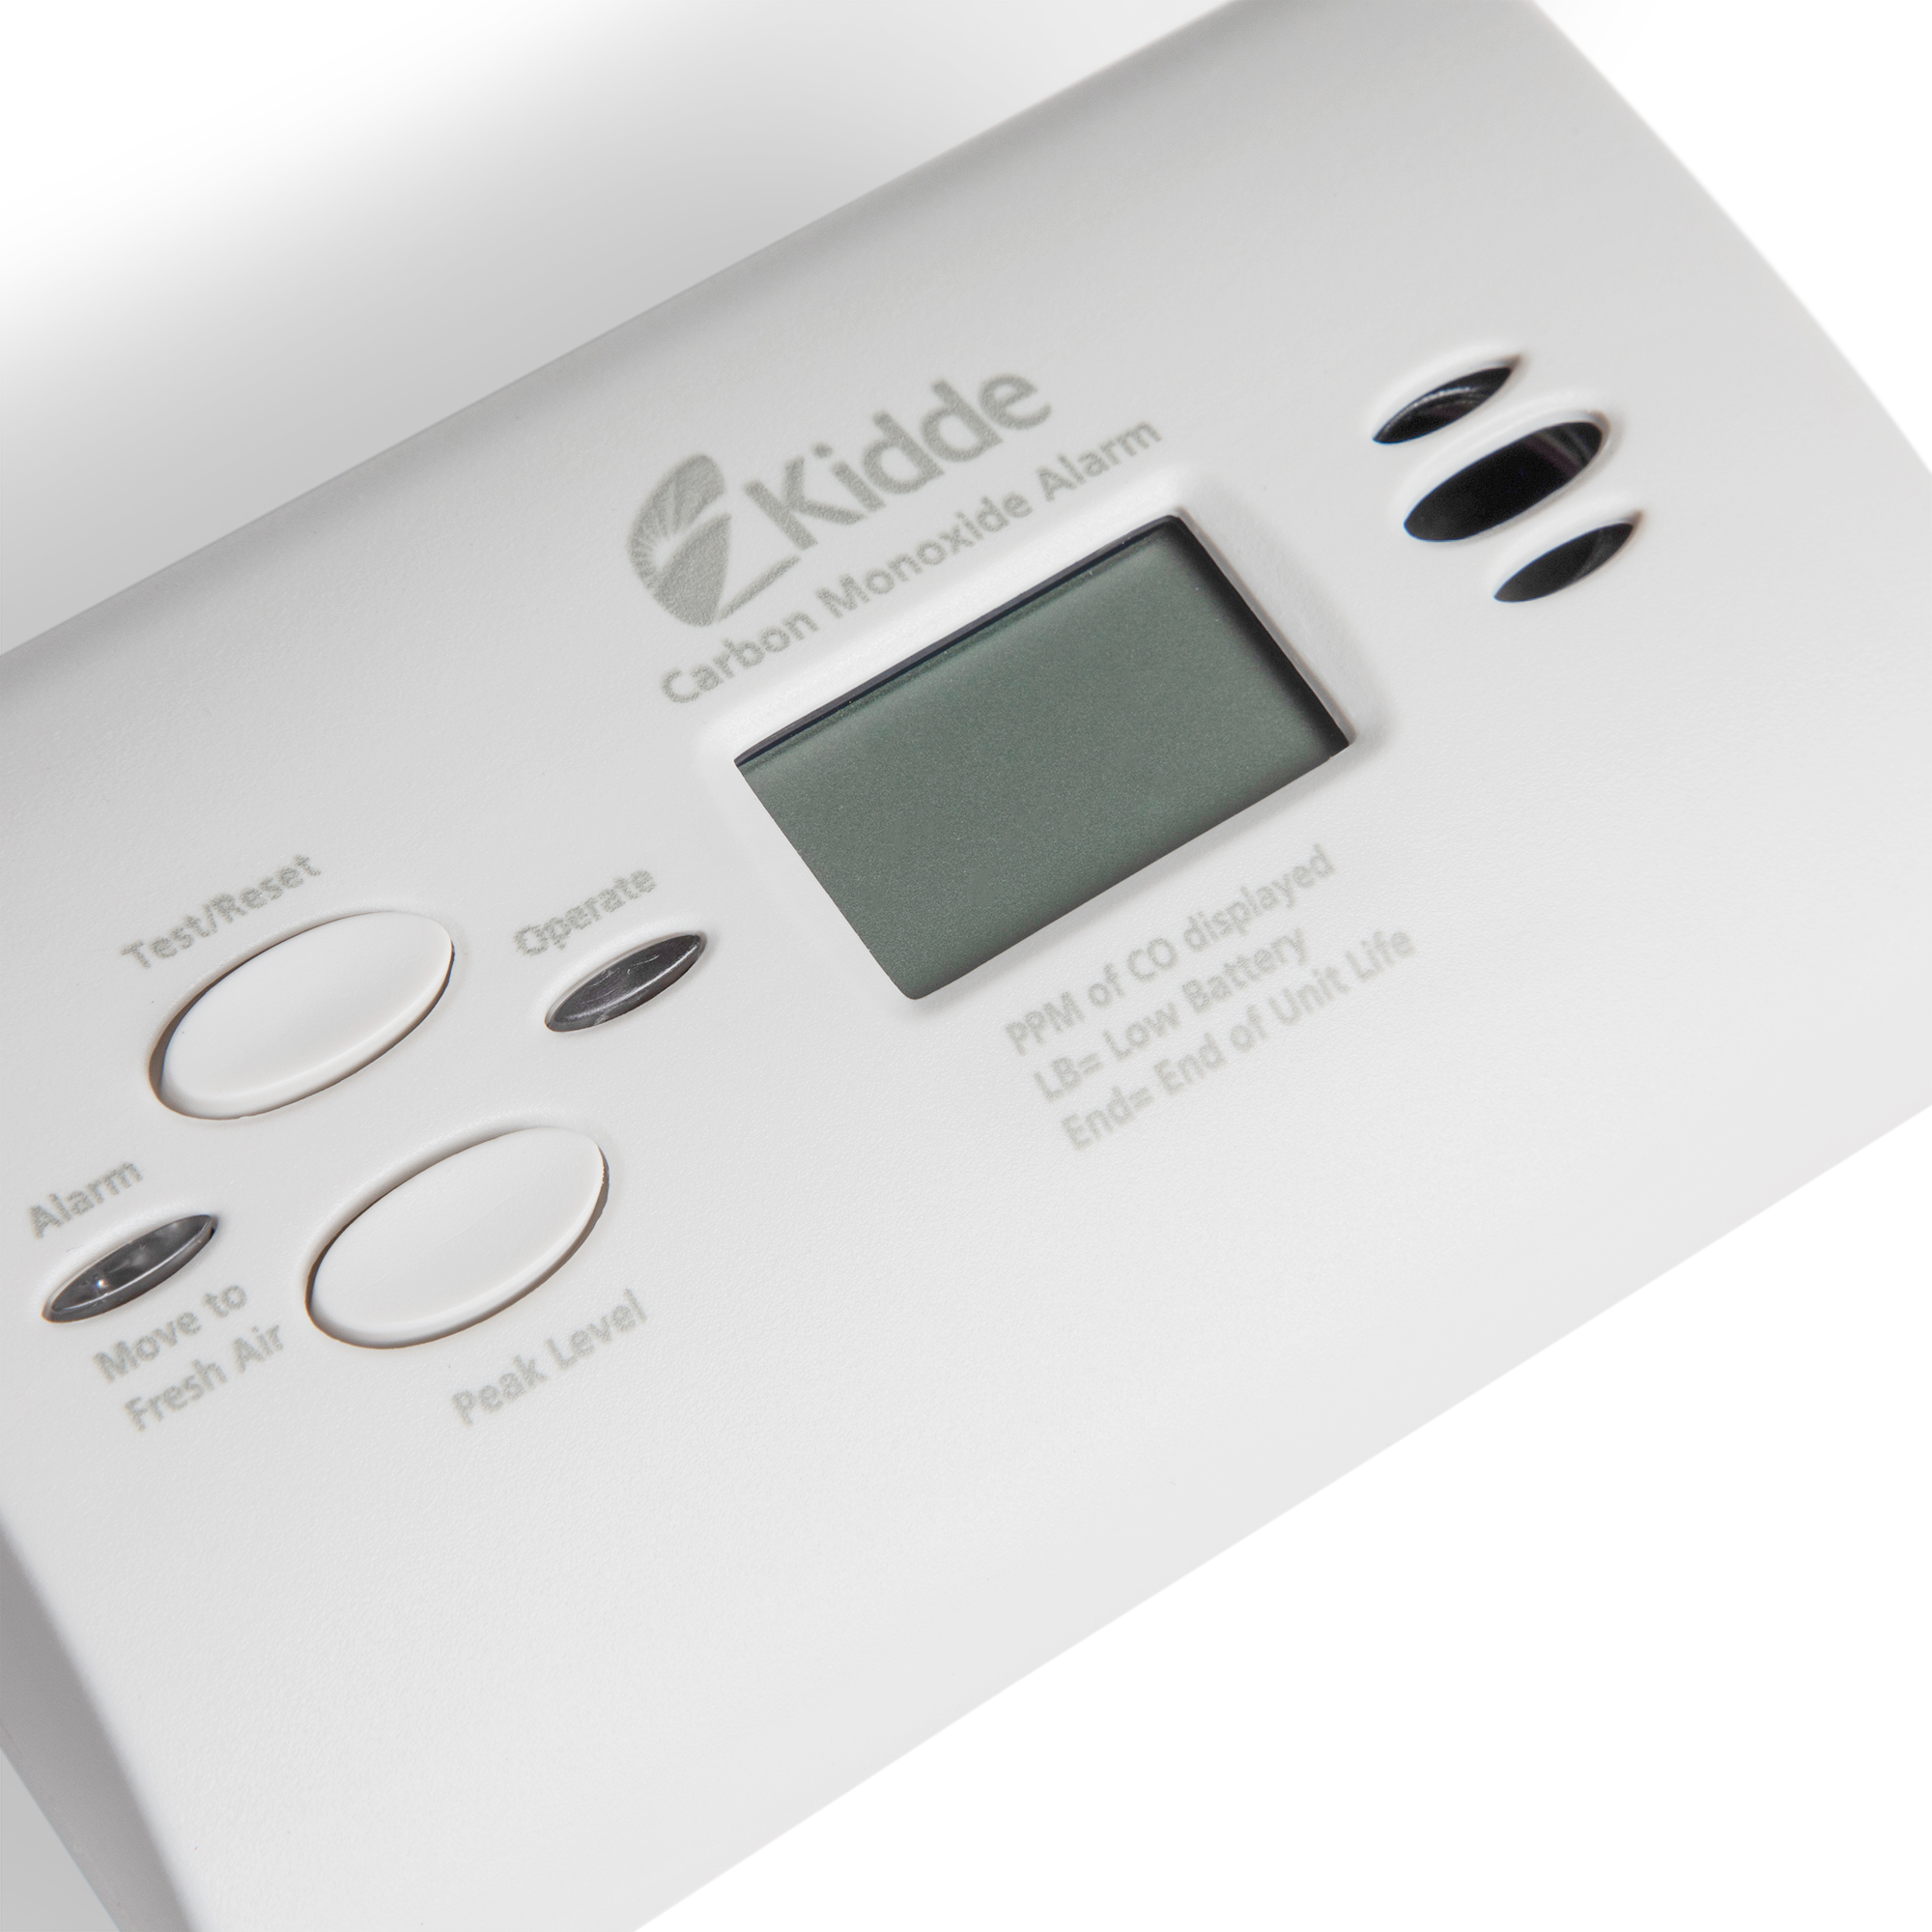 Kidde Battery Operated Carbon Monoxide Alarm with Digital Display KN-COPP-B-LPM - image 3 of 9